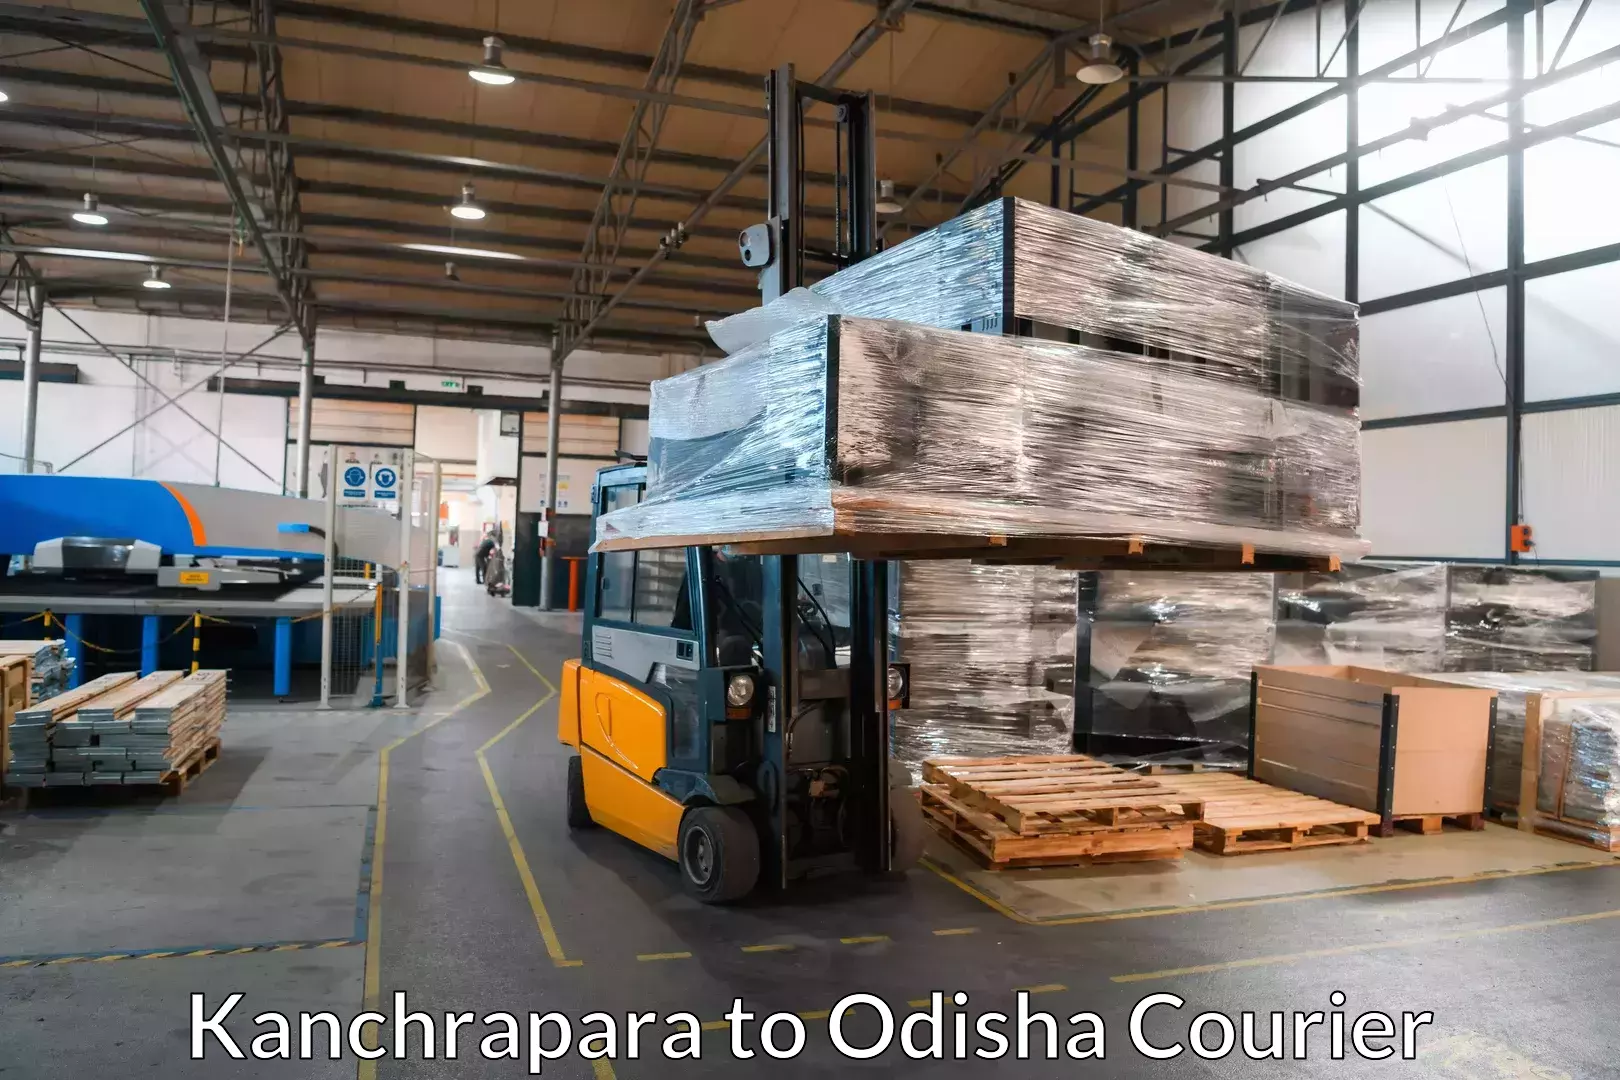 Customized relocation services in Kanchrapara to Paradip